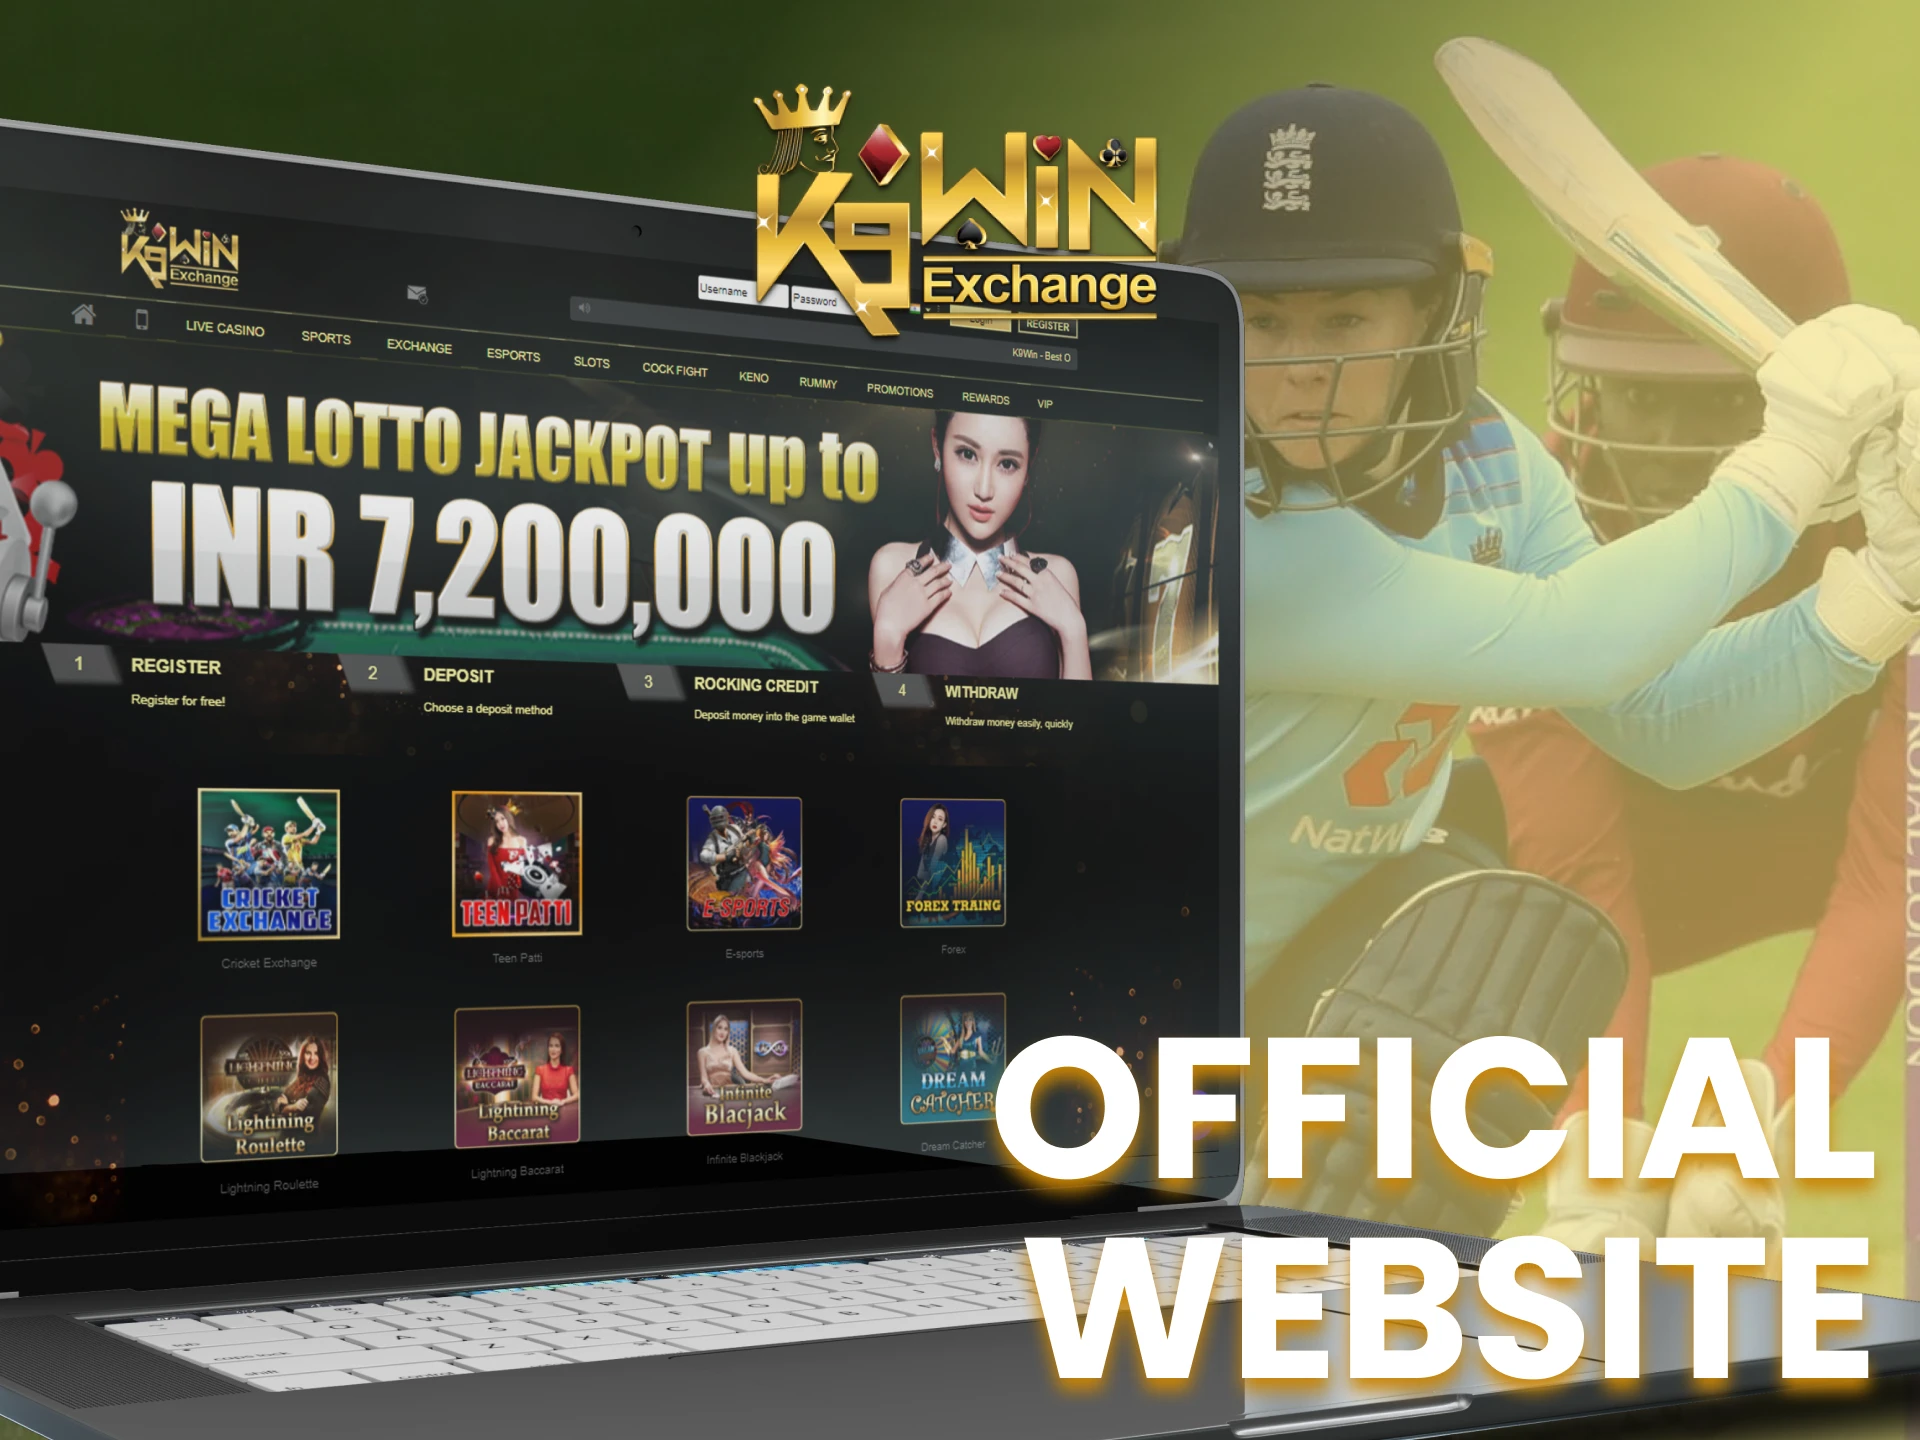 Start betting by visiting K9Win's official website.